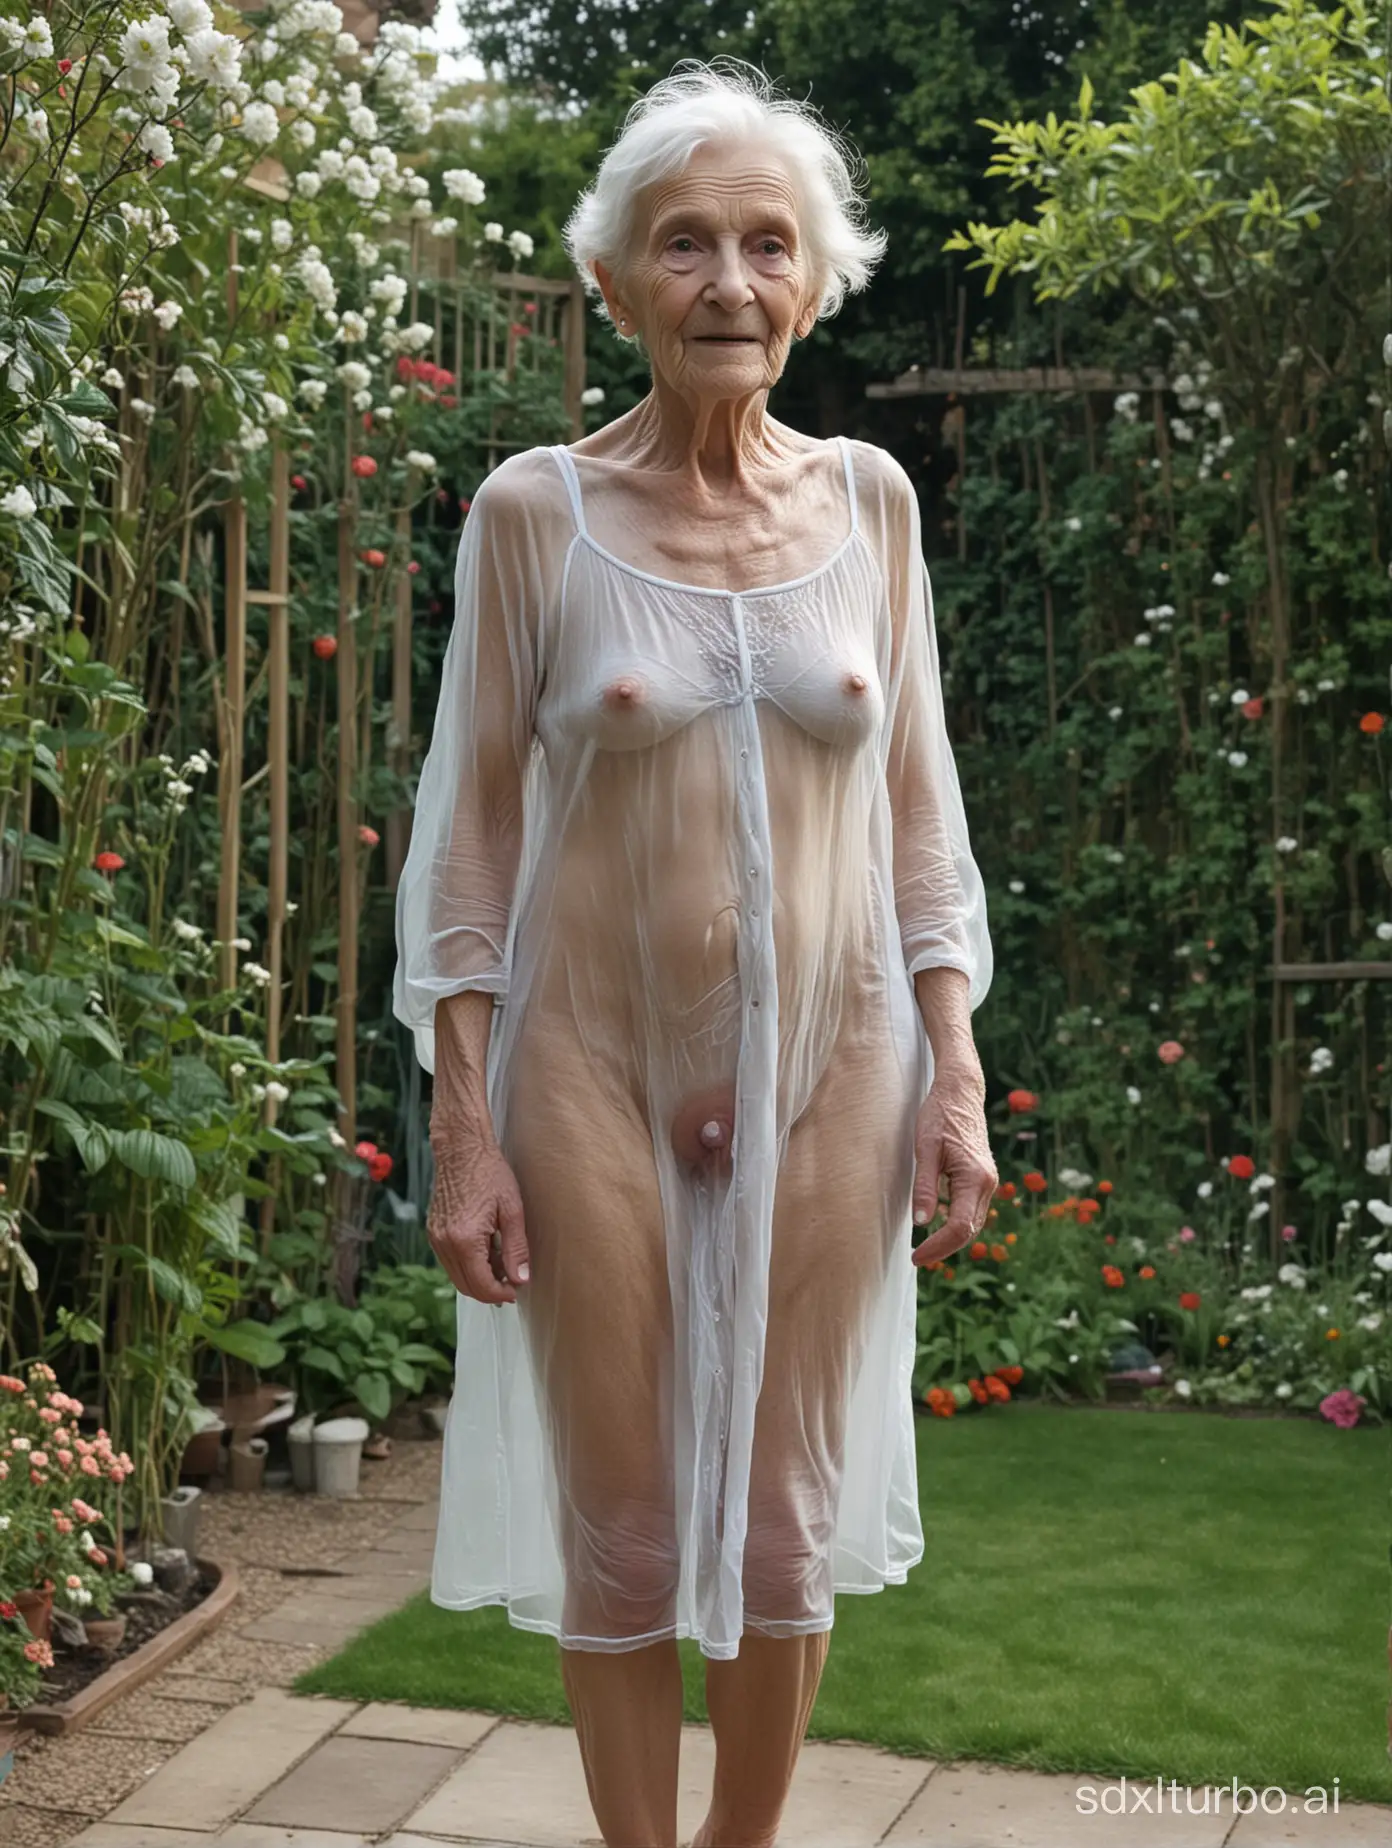 anorexic 130-year-old  wrinkled body  granny standing in garden in a complete see thru  very short nightie pulled up